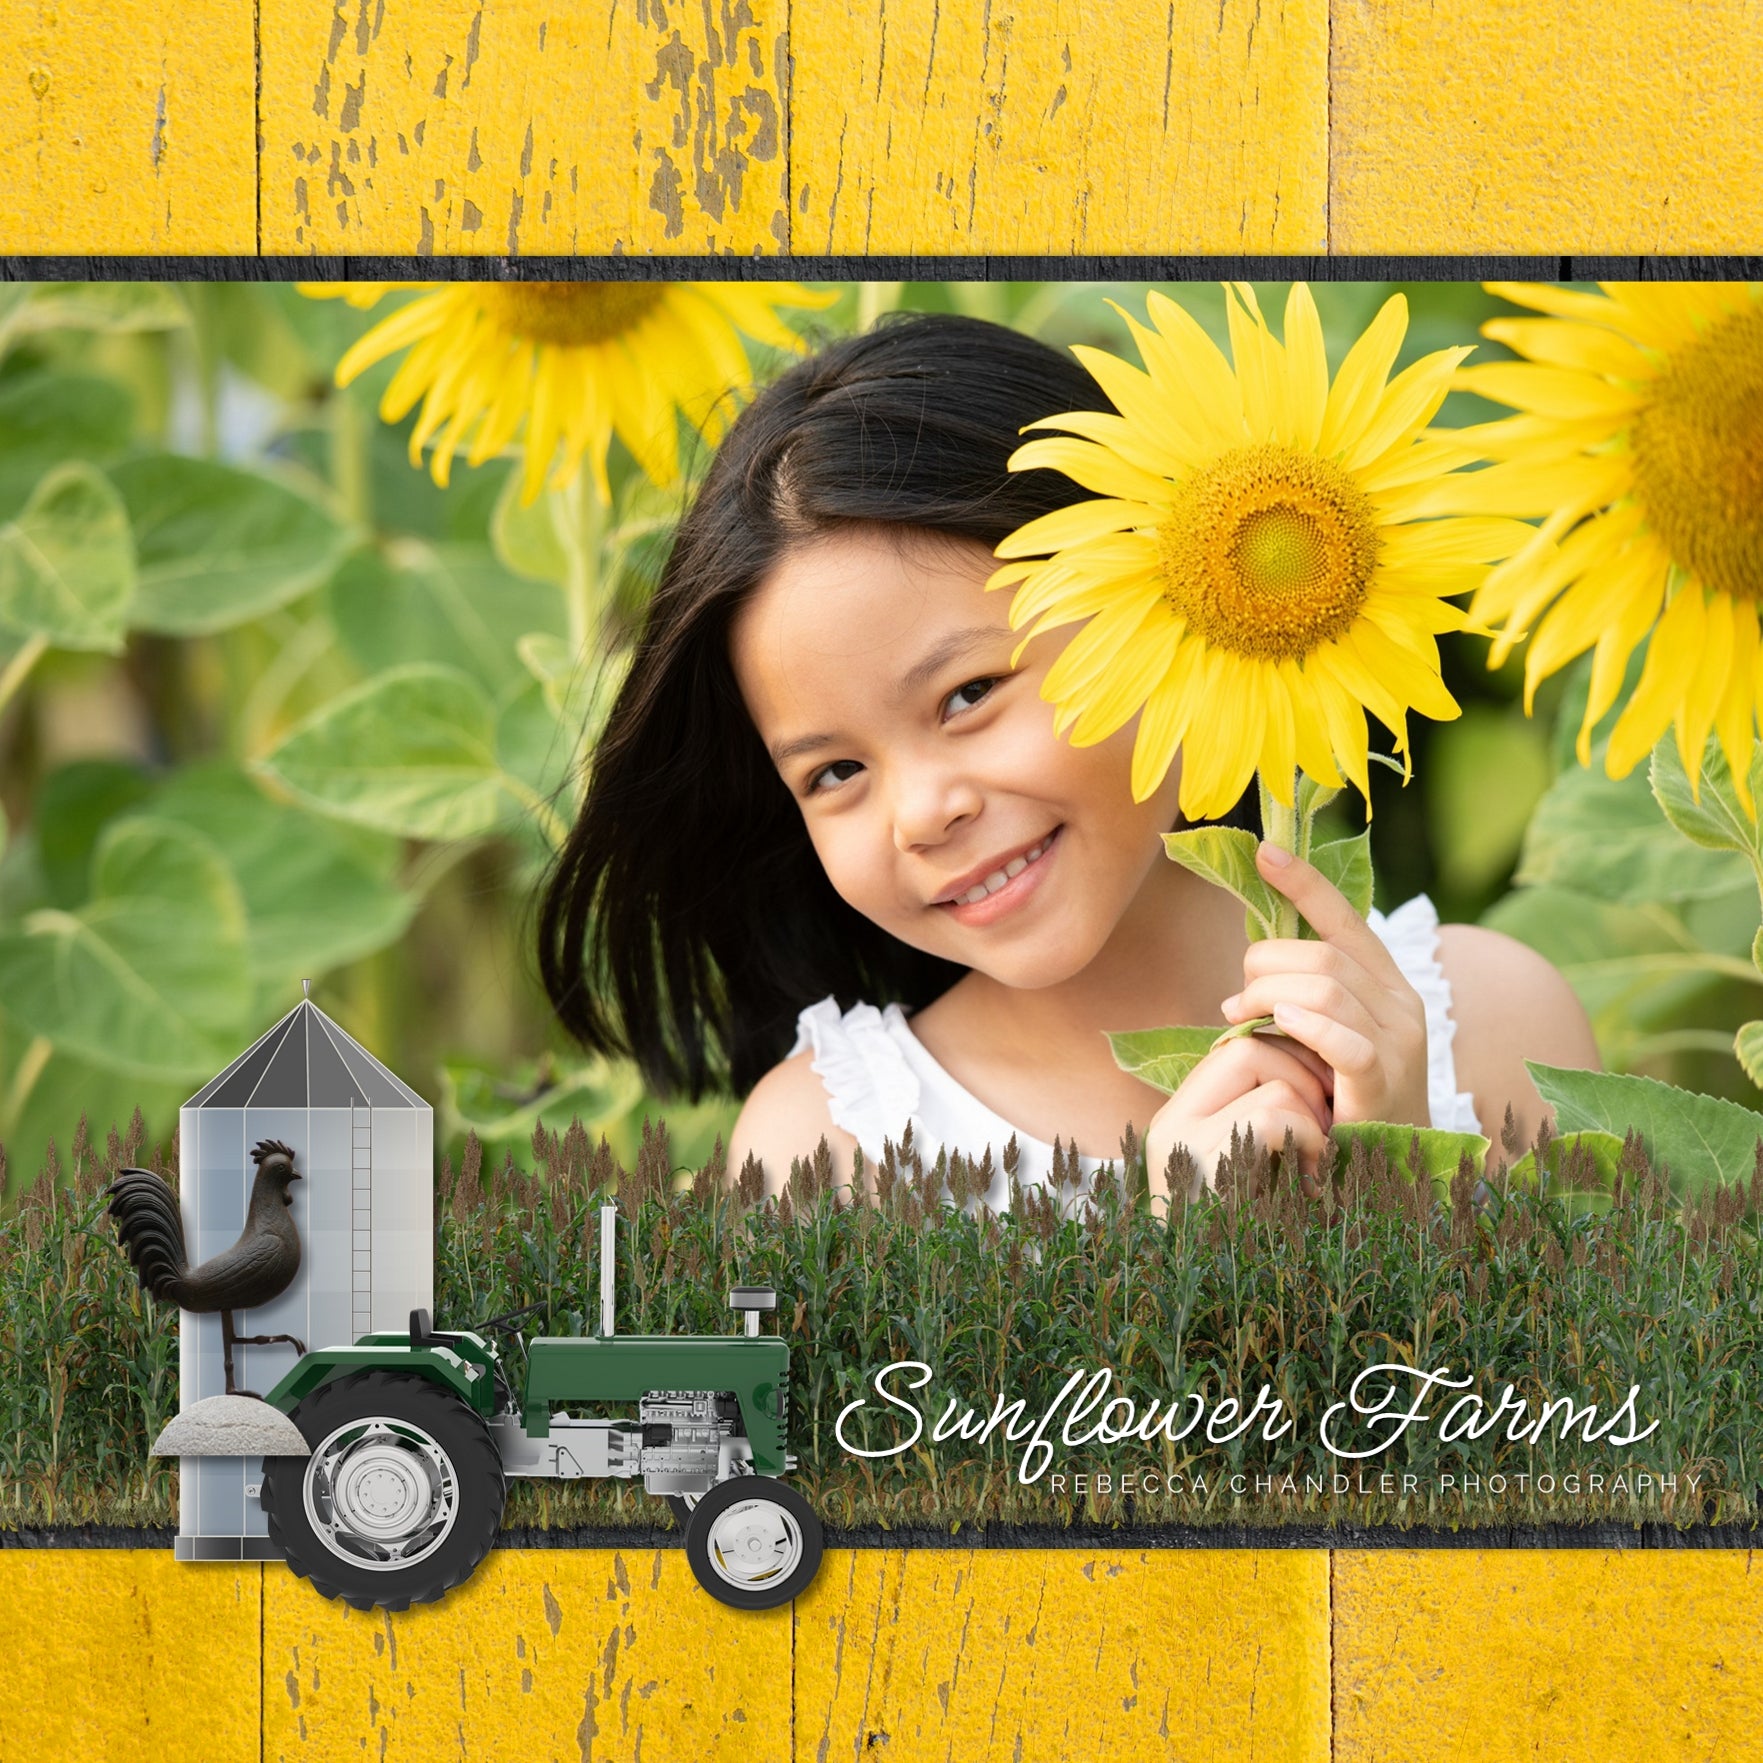 The Around the Farm Kit by Lucky Girl Creative explores life around the farm, barn, fields and garden. With modern agriculture machinery and tractor equipment, barnyard animals, and other realistic farm and ranch elements, this collection will showcase your farm photos in authentic style. Also great for documenting farm field trip visits, 4H projects, or state and county fairs.